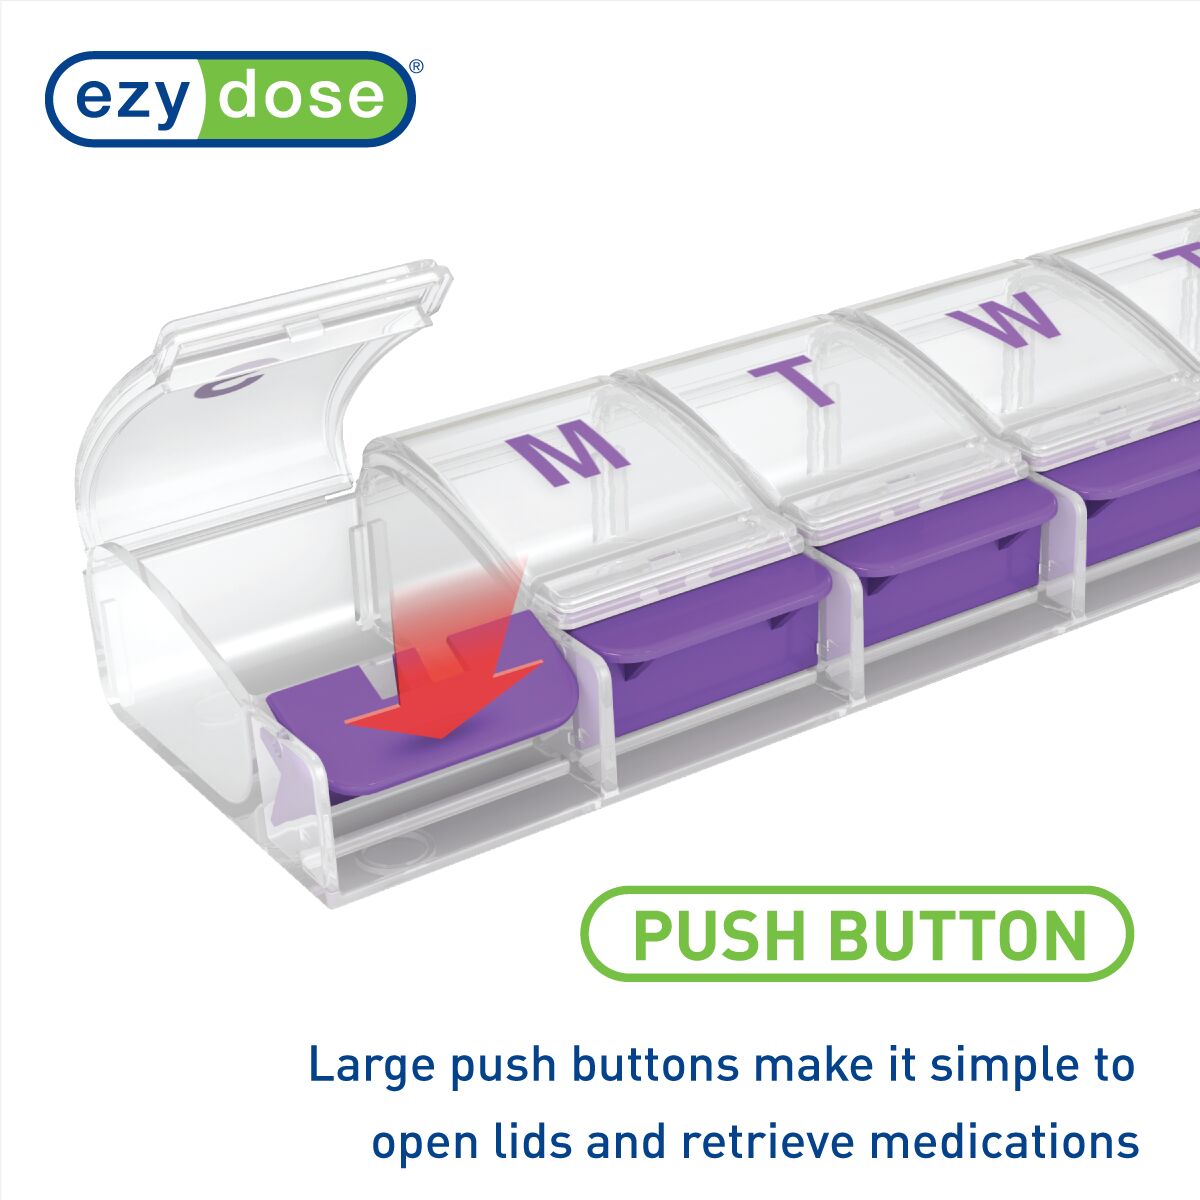 The weekly pill organizer features large push buttons make it simple to open lids and retrieve medications